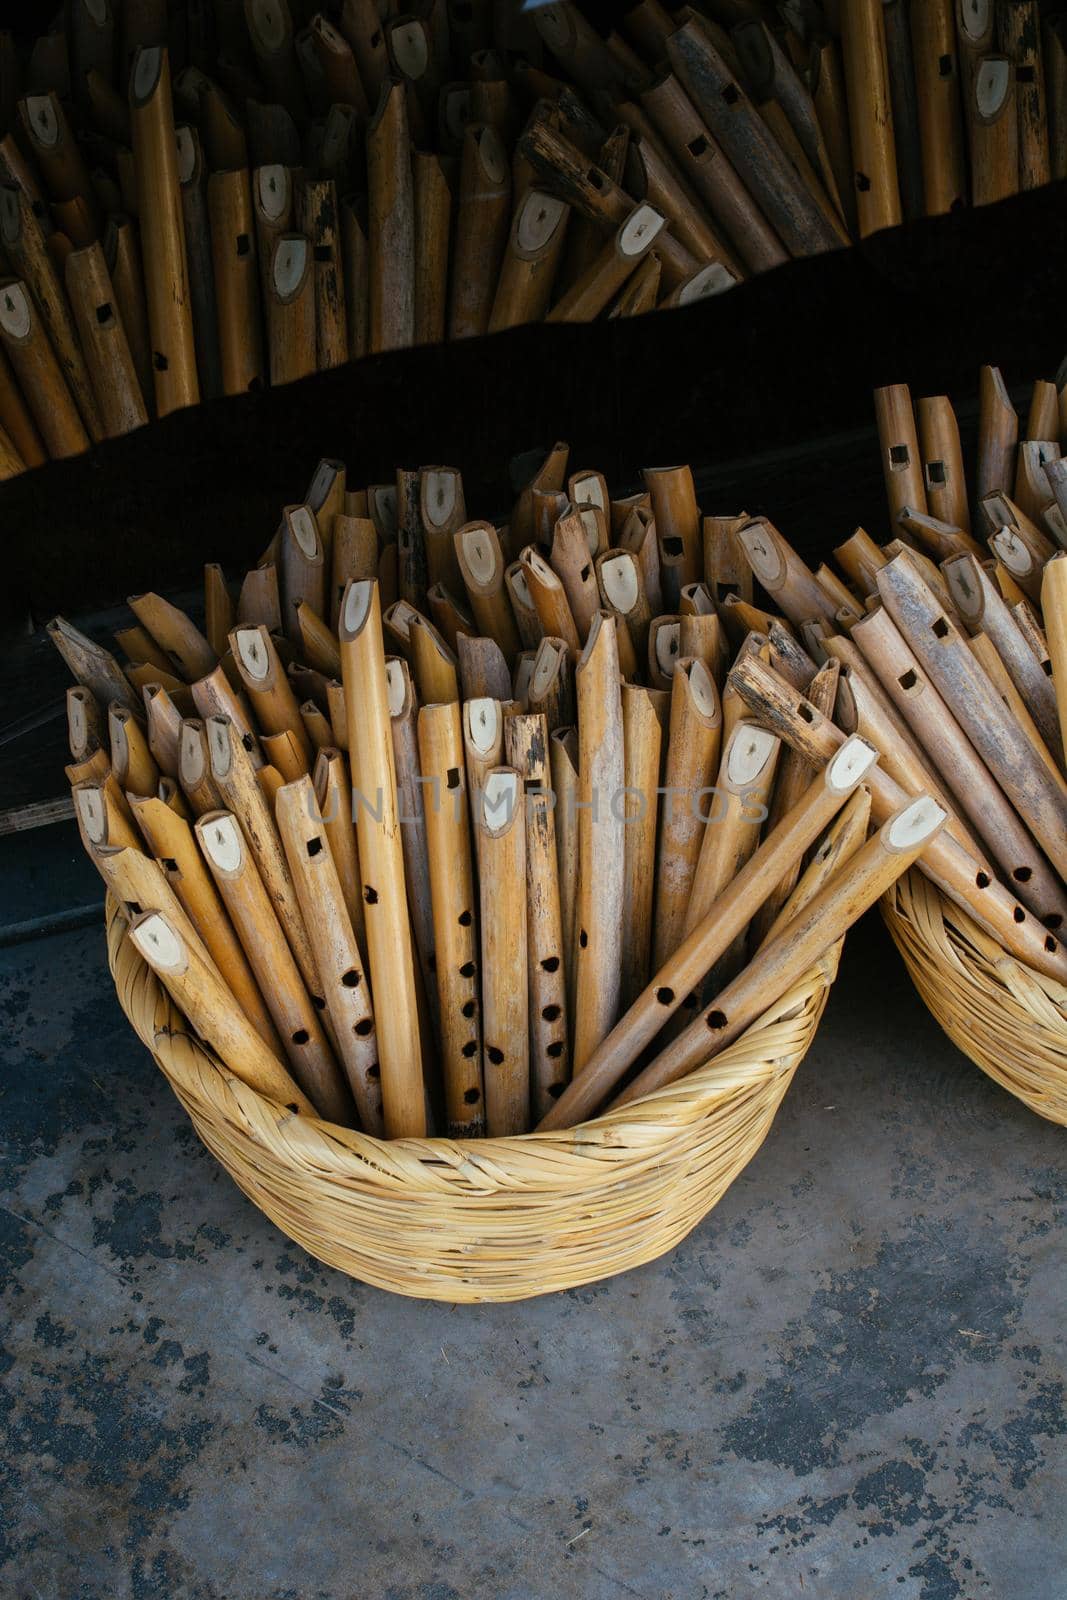 Dozens of handmade wooden flutes in the view